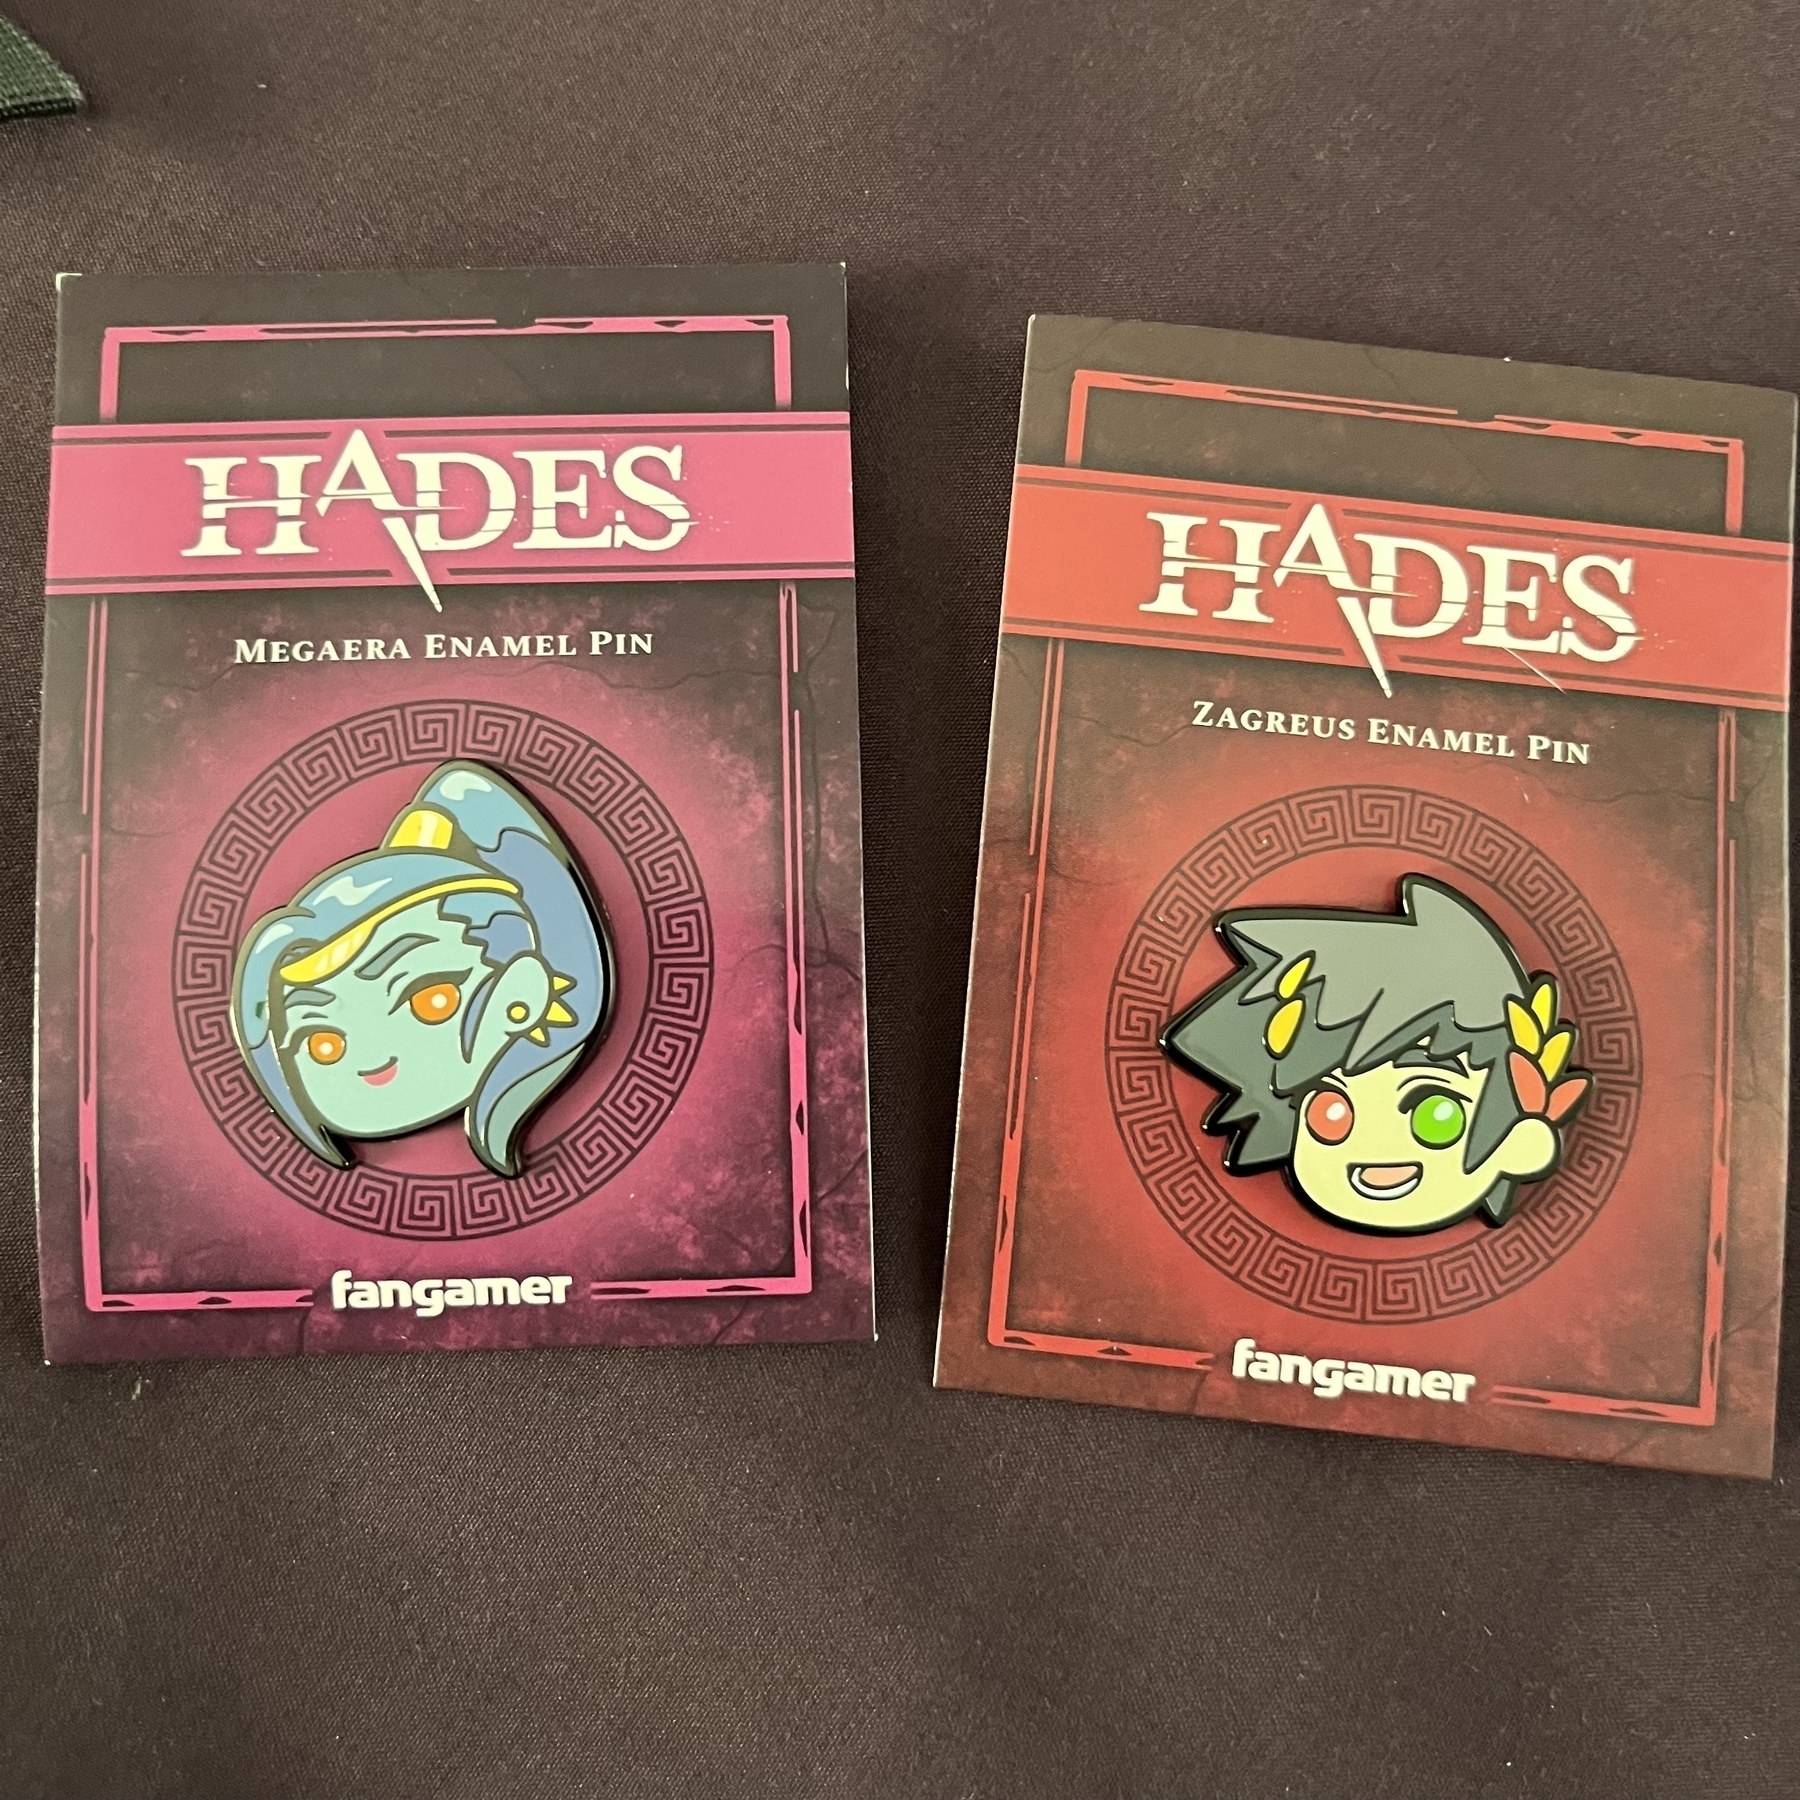 A pin of Megaera and a pin of Zagreus in their original packaging.